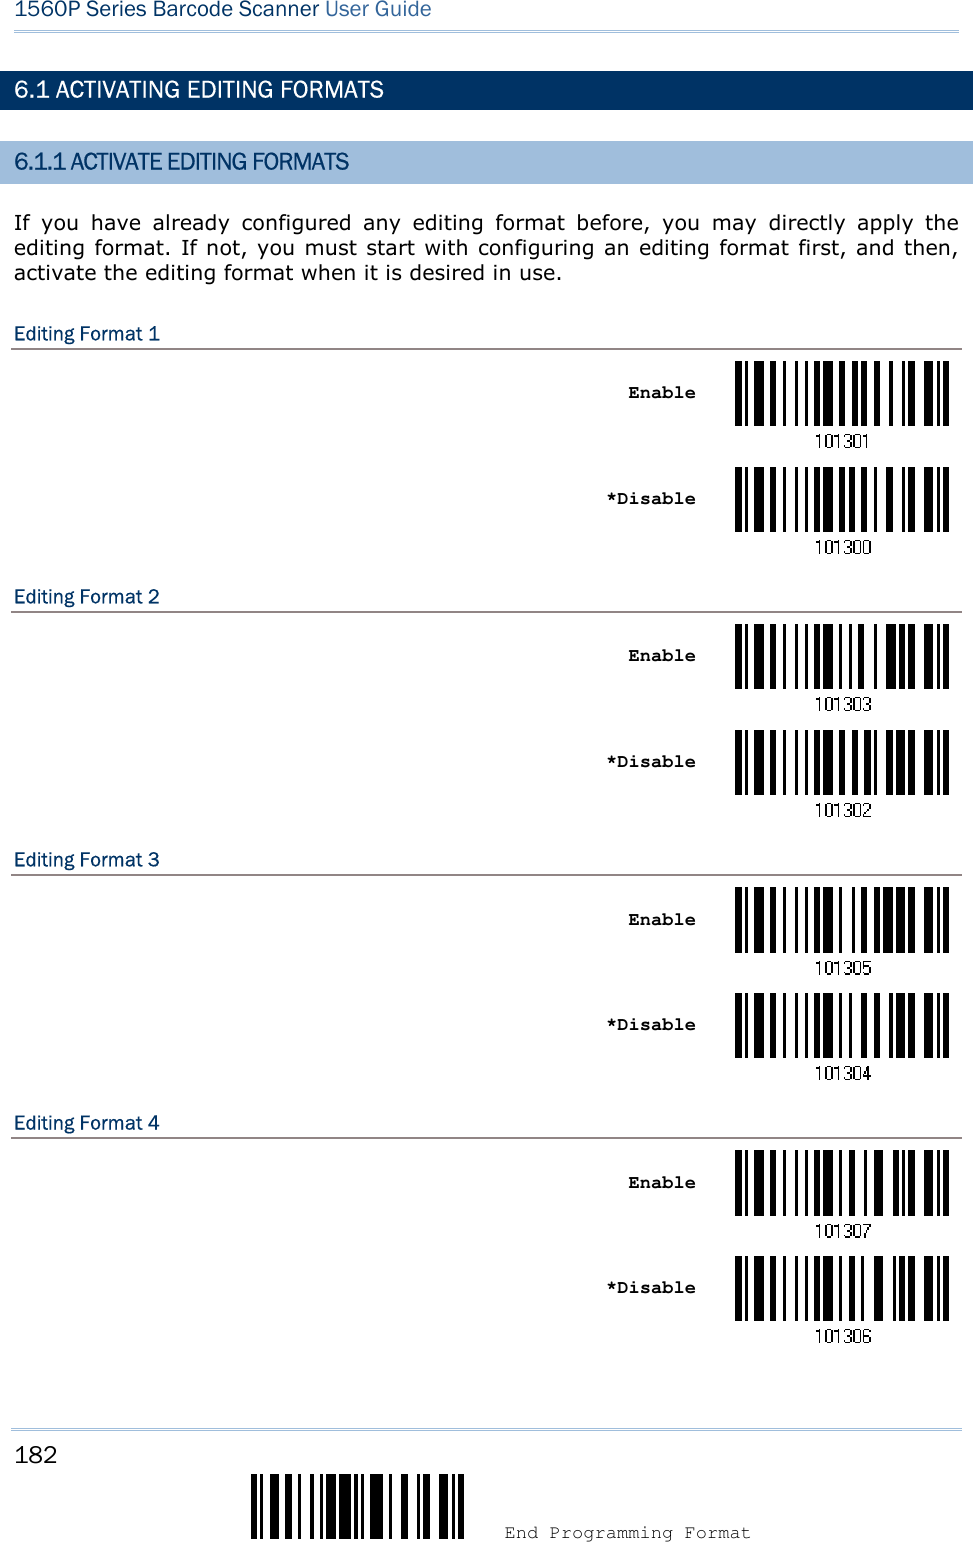 182  End Programming Format 1560P Series Barcode Scanner User Guide 6.1 ACTIVATING EDITING FORMATS 6.1.1 ACTIVATE EDITING FORMATS If  you  have  already  configured  any  editing  format  before,  you  may  directly  apply  the editing format. If not, you must start with configuring an editing format first, and then, activate the editing format when it is desired in use. Editing Format 1 Enable *DisableEditing Format 2 Enable *DisableEditing Format 3 Enable *DisableEditing Format 4 Enable *Disable